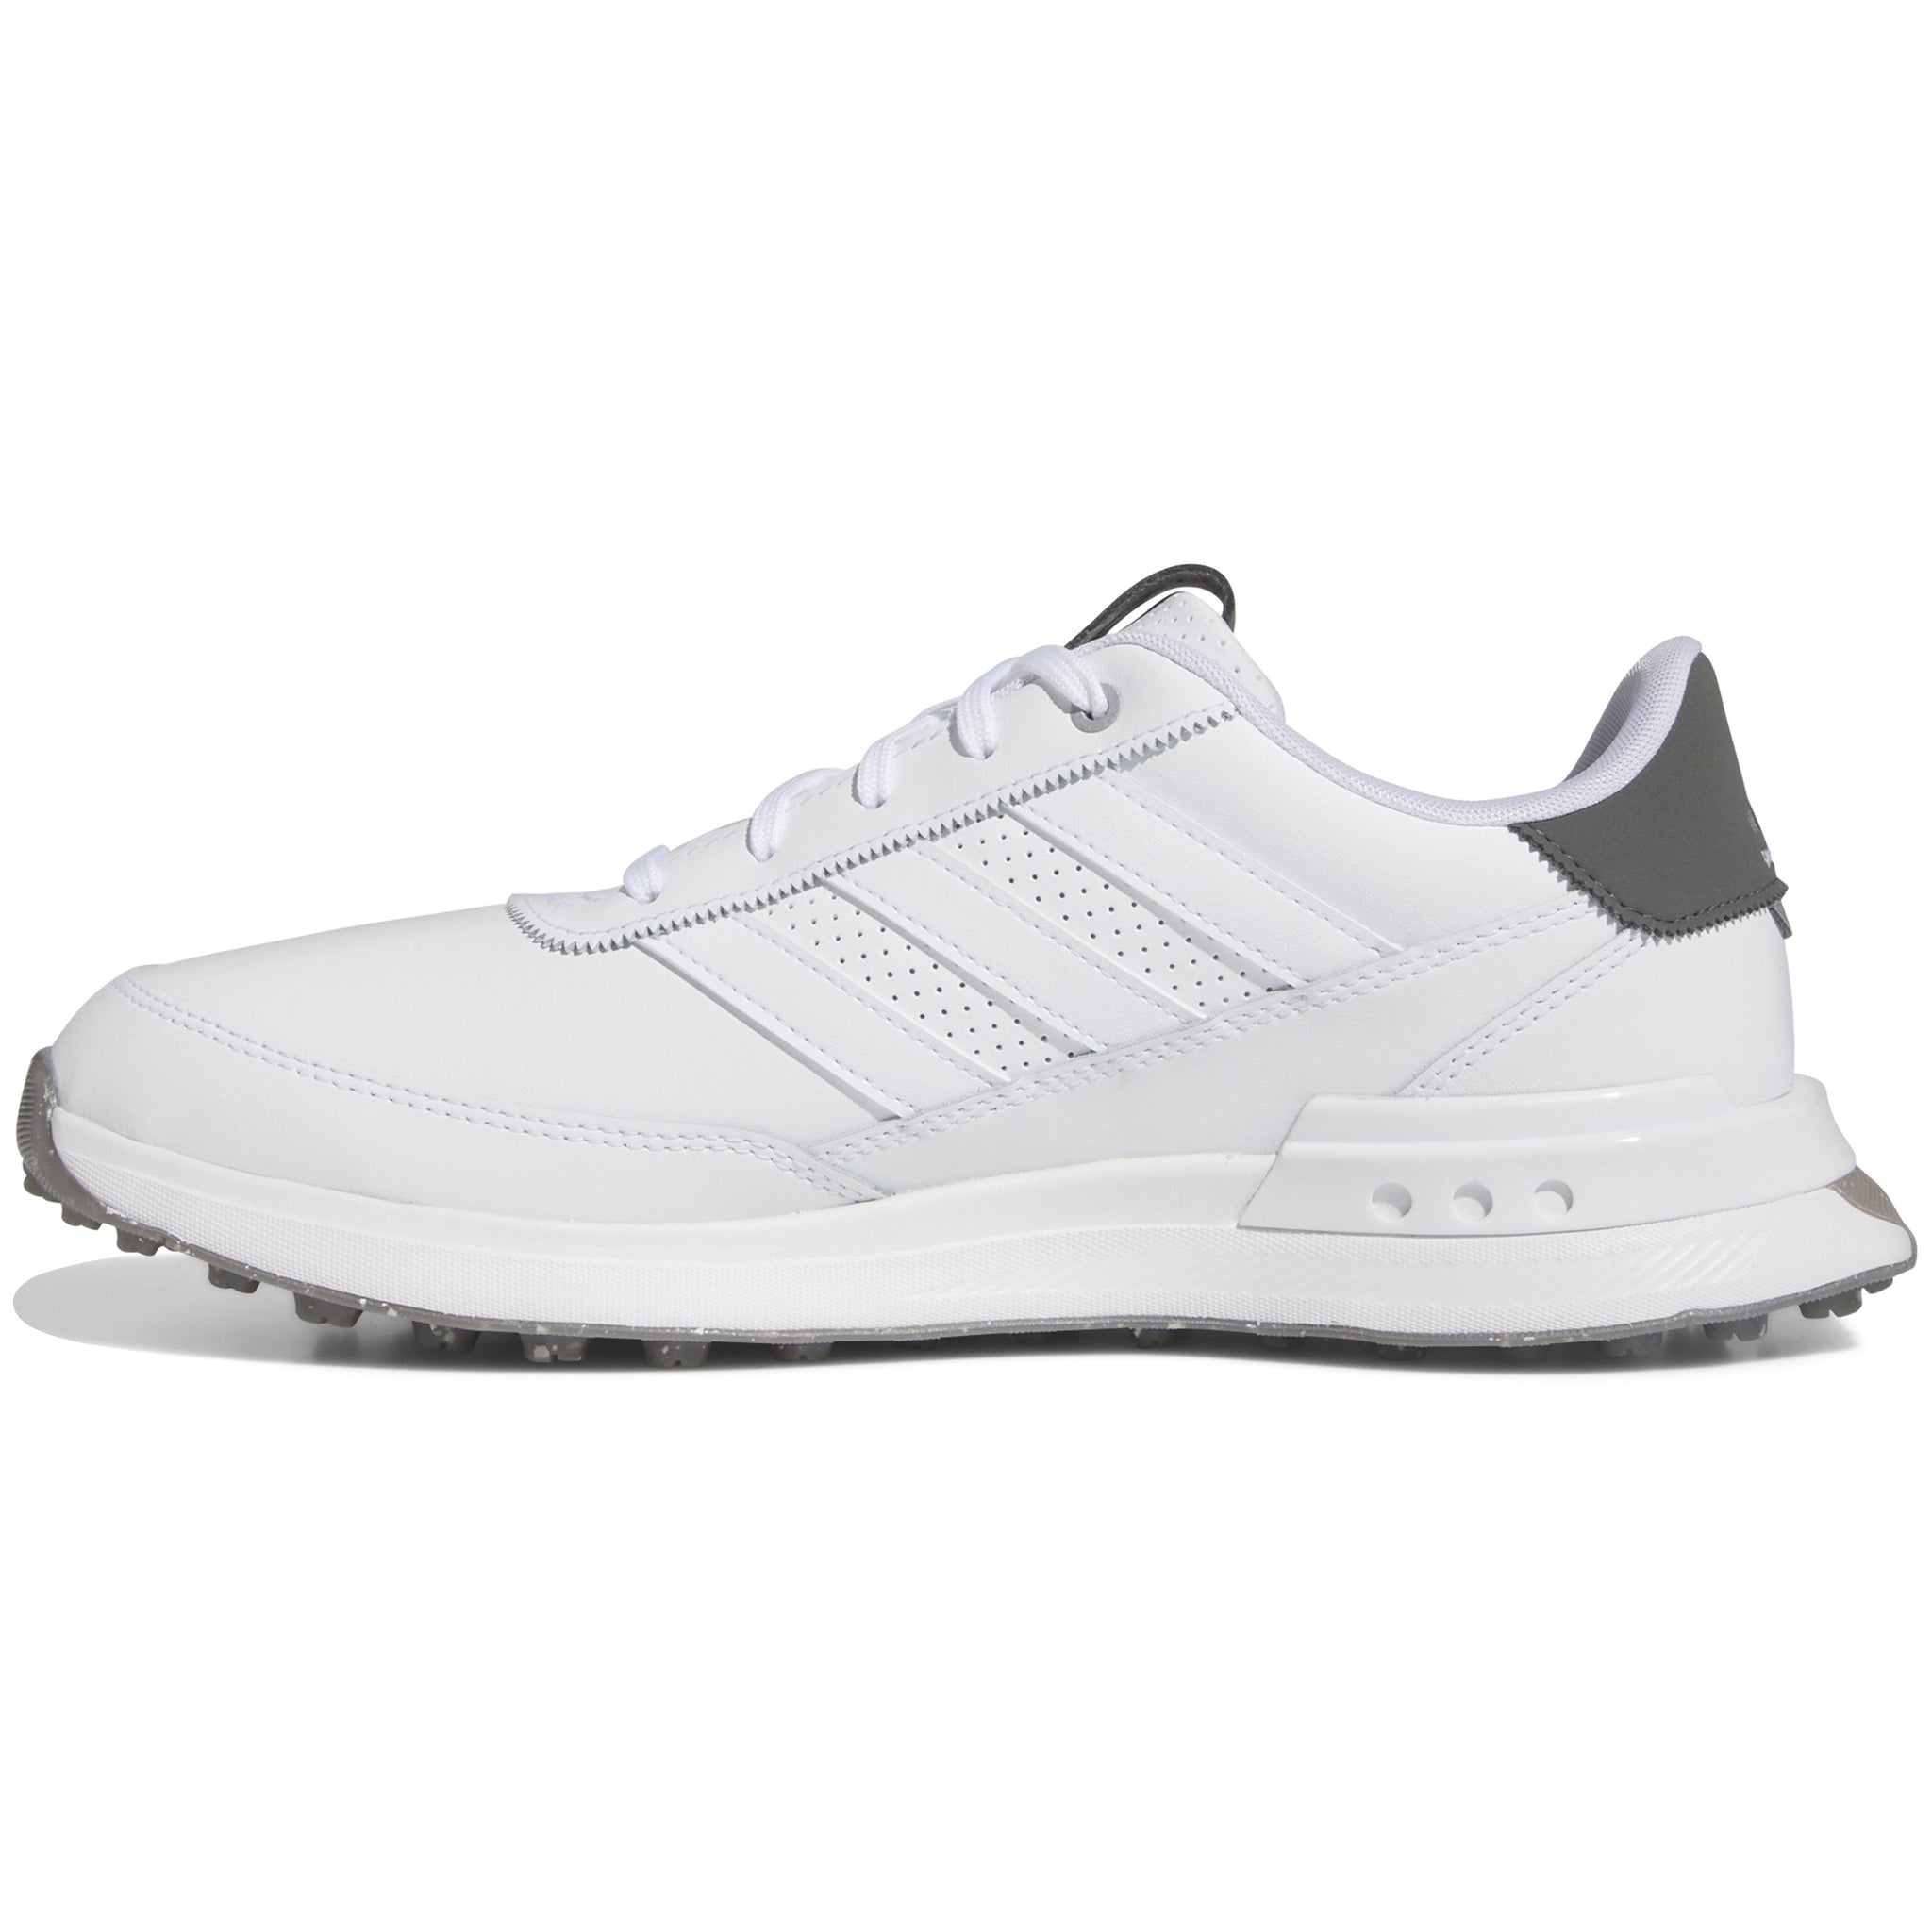 adidas-s2g-sl-leather-24-golf-shoes-if0298-white-charcoal